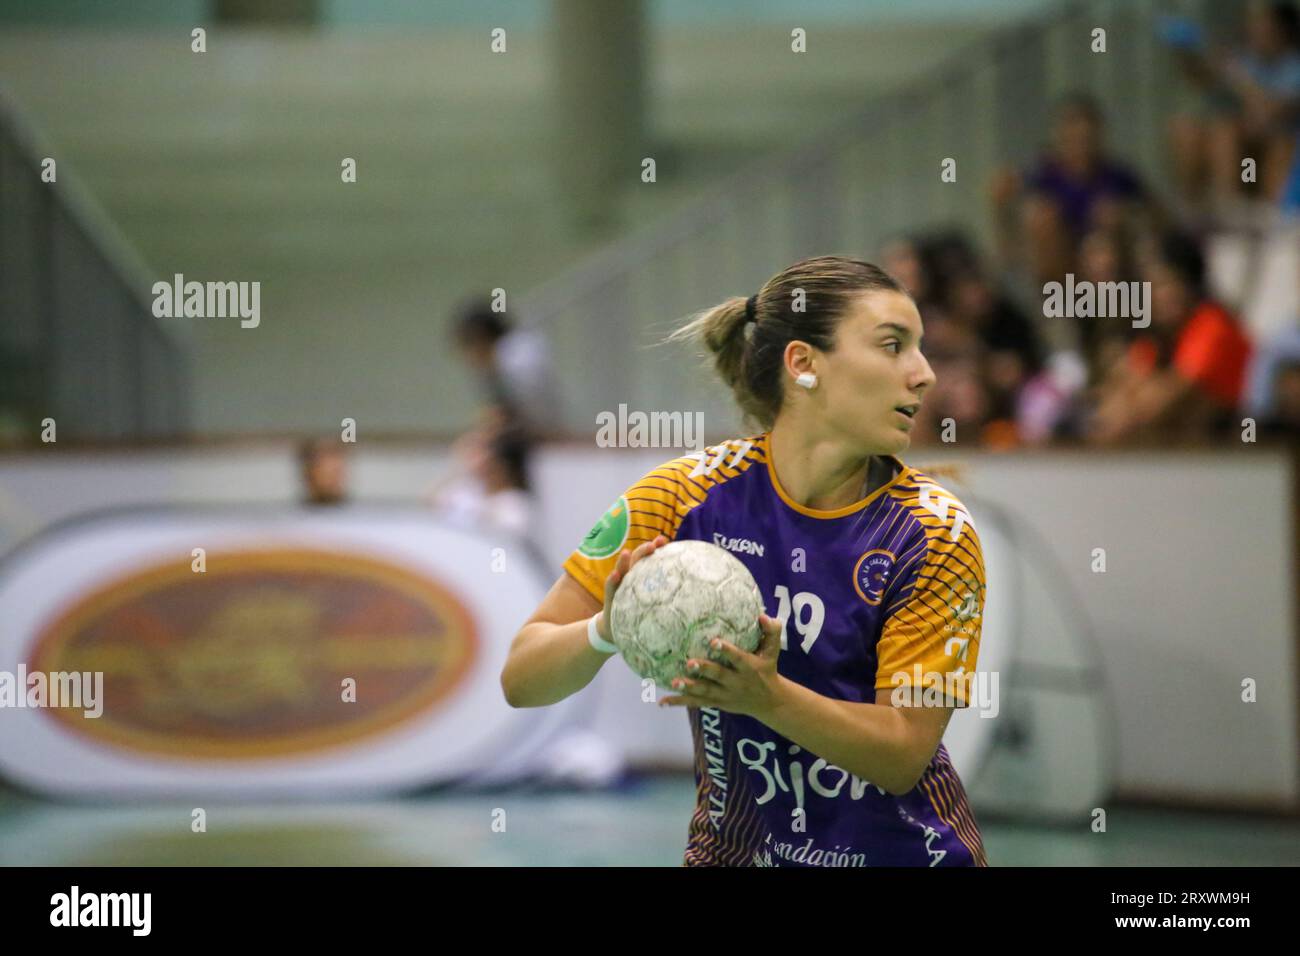 Gijon, Spain, 26th September, 2023: The player of Motive.co Gijon Balonmano La Calzada, Marta da Silva (19) with the ball during the 8th Matchday of the Liga Guerreras Iberdrola 2023-24 between Motive.co Gijon Balonmano La Calzada and the Super Amara Bera Bera, on September 26, 2023, at the La Arena Sports Pavilion, in Gijón, Spain. (Photo by Alberto Brevers / Pacific Press) Stock Photo